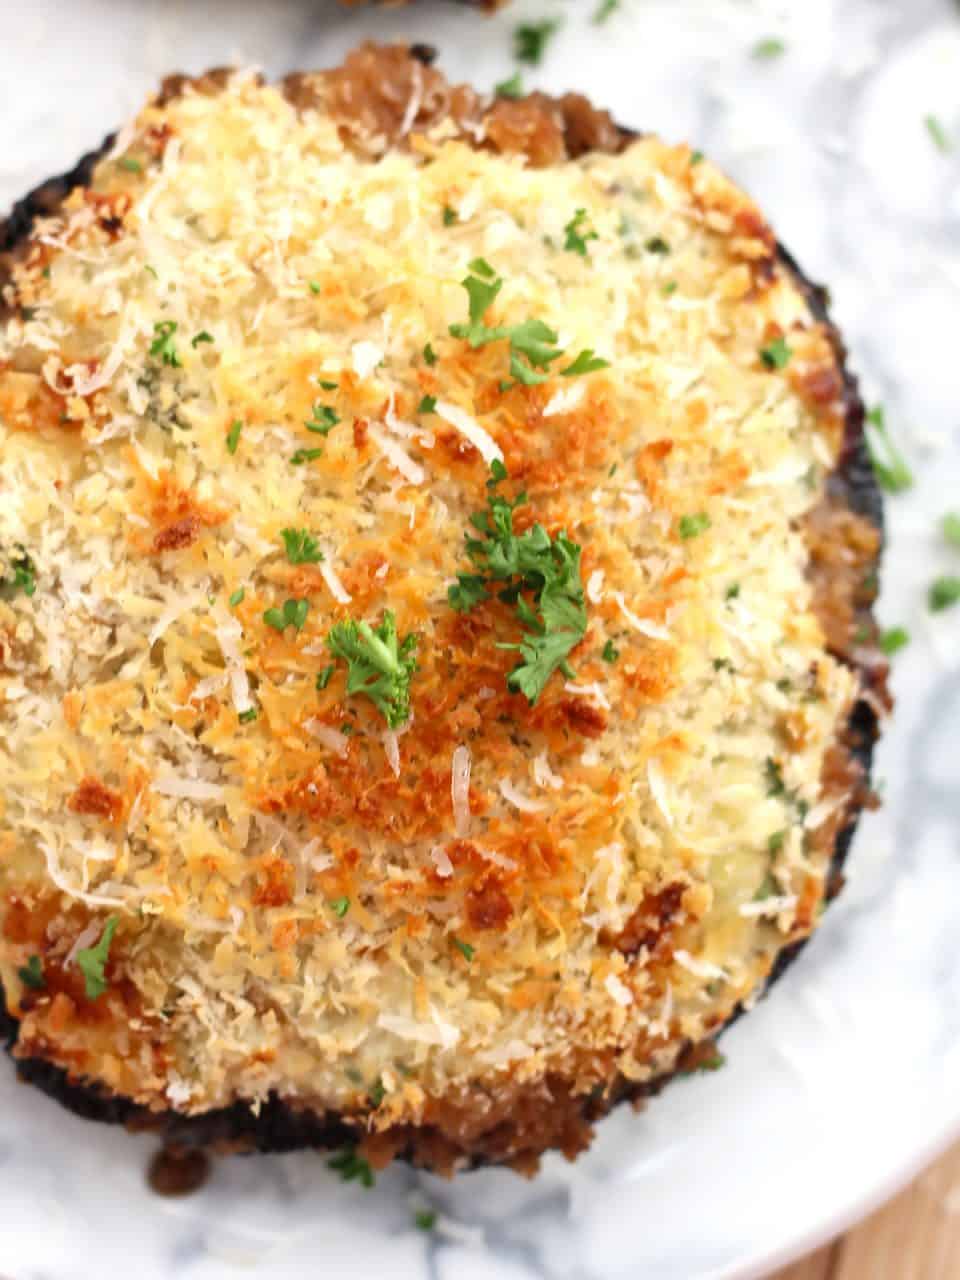 Top shot of a baked stuffed mushroom garnished with fresh parsley.